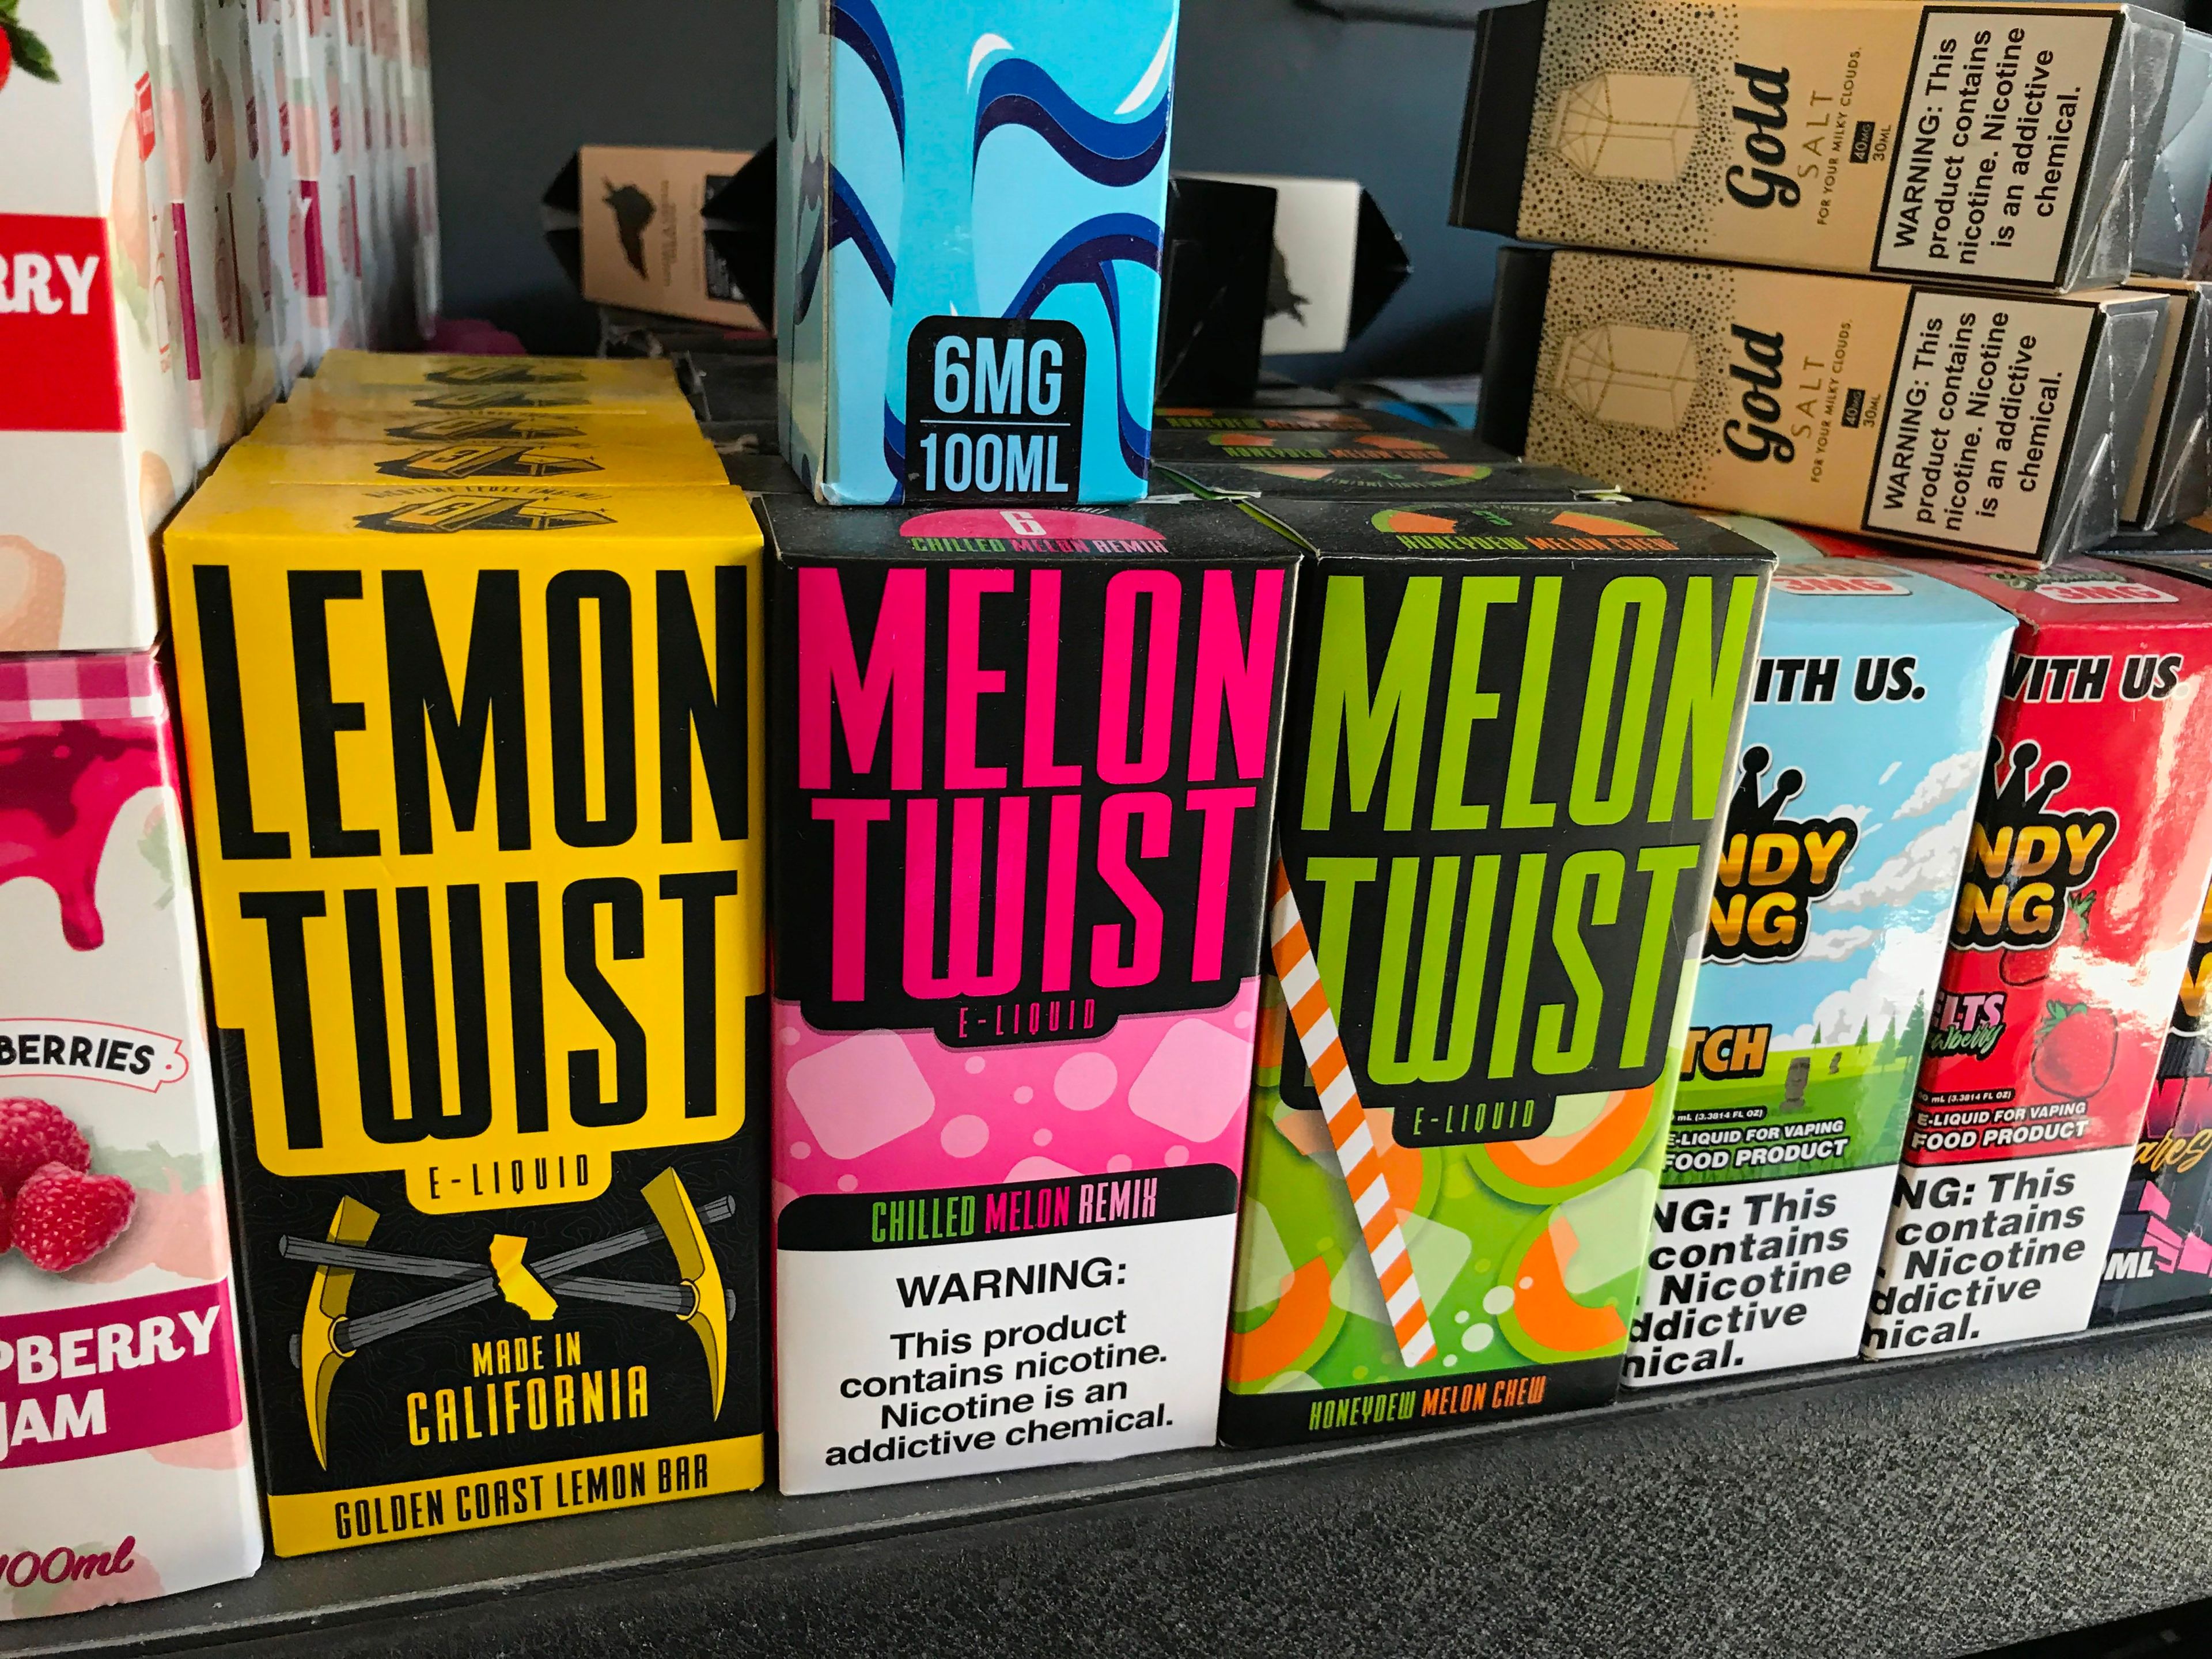 A collection of vape products in various flavors, including lemon twist and lemon twist, on a store shelf.